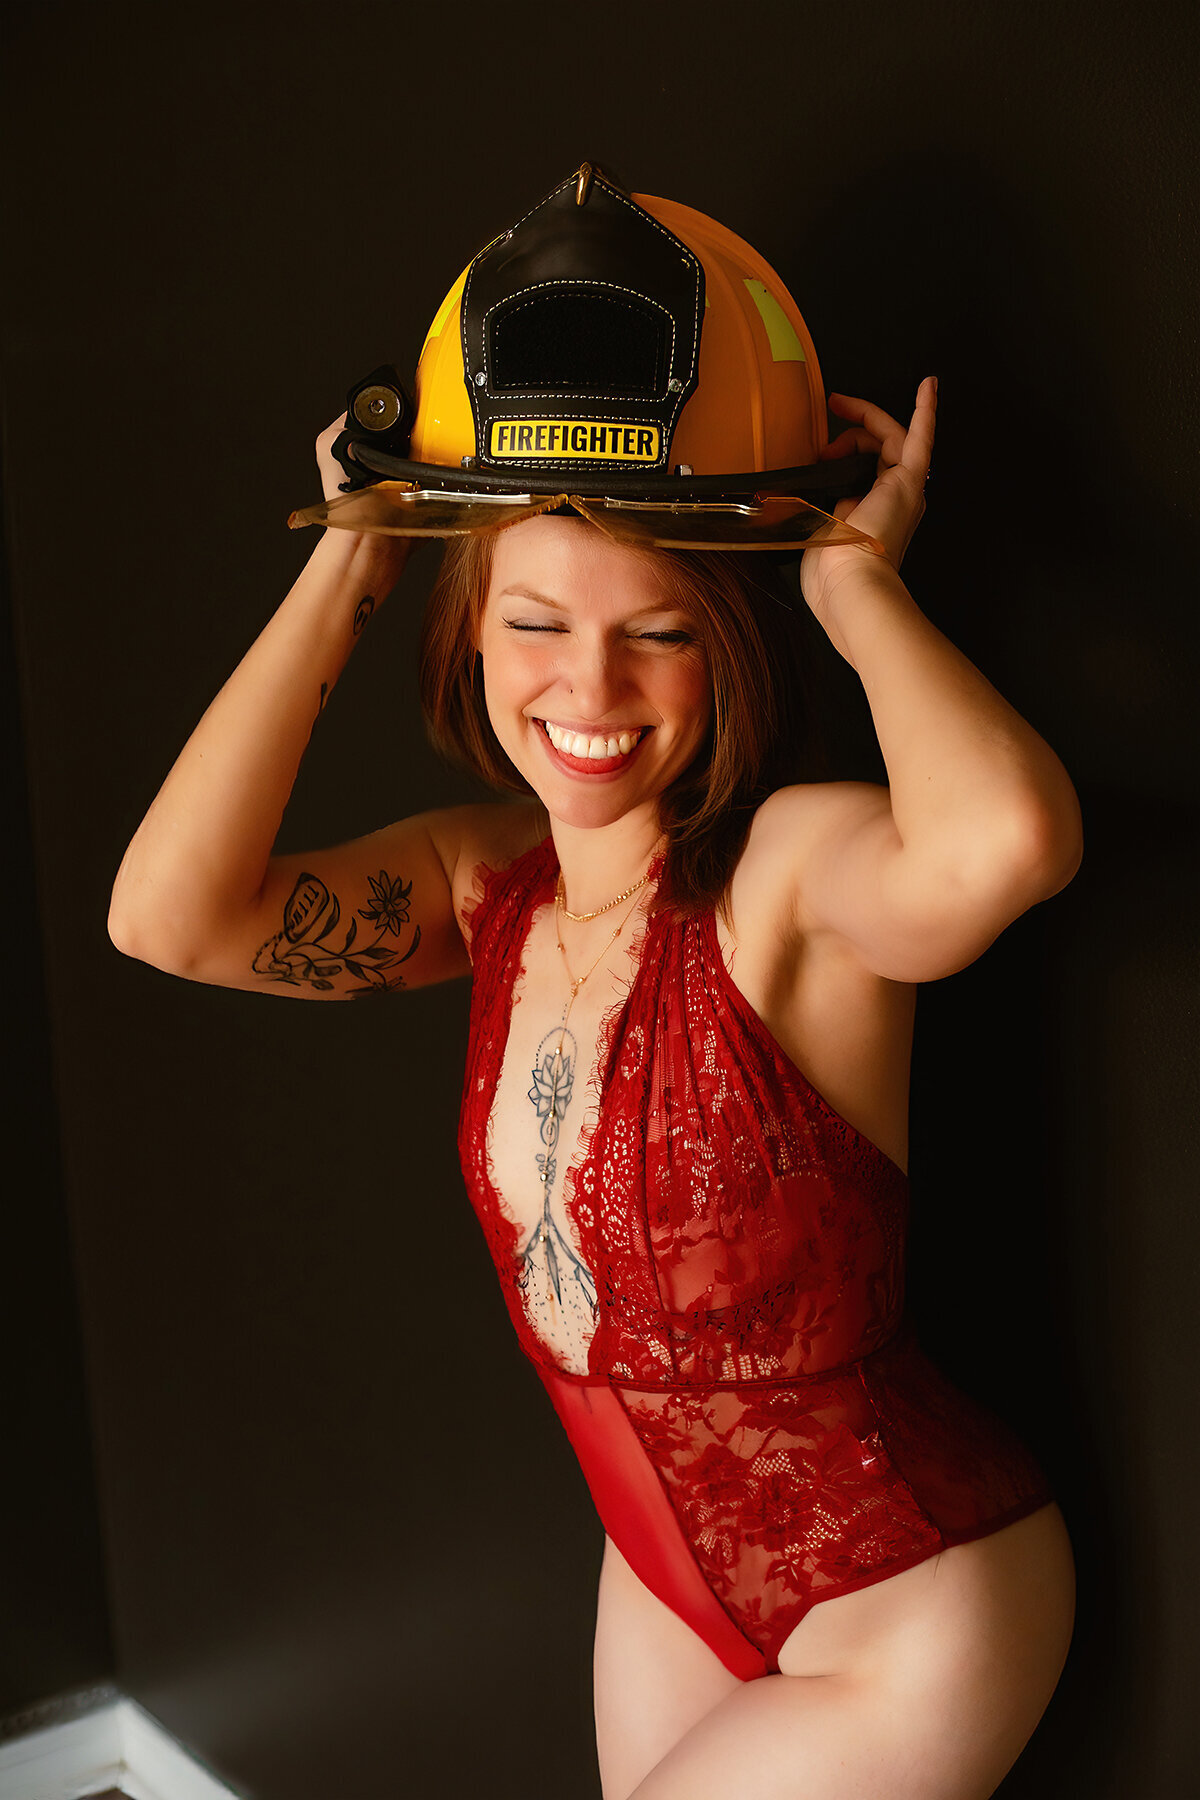 A woman wearing red lingerie smiles and laughs while wearing a fireman's hat during a boudoir photoshoot.